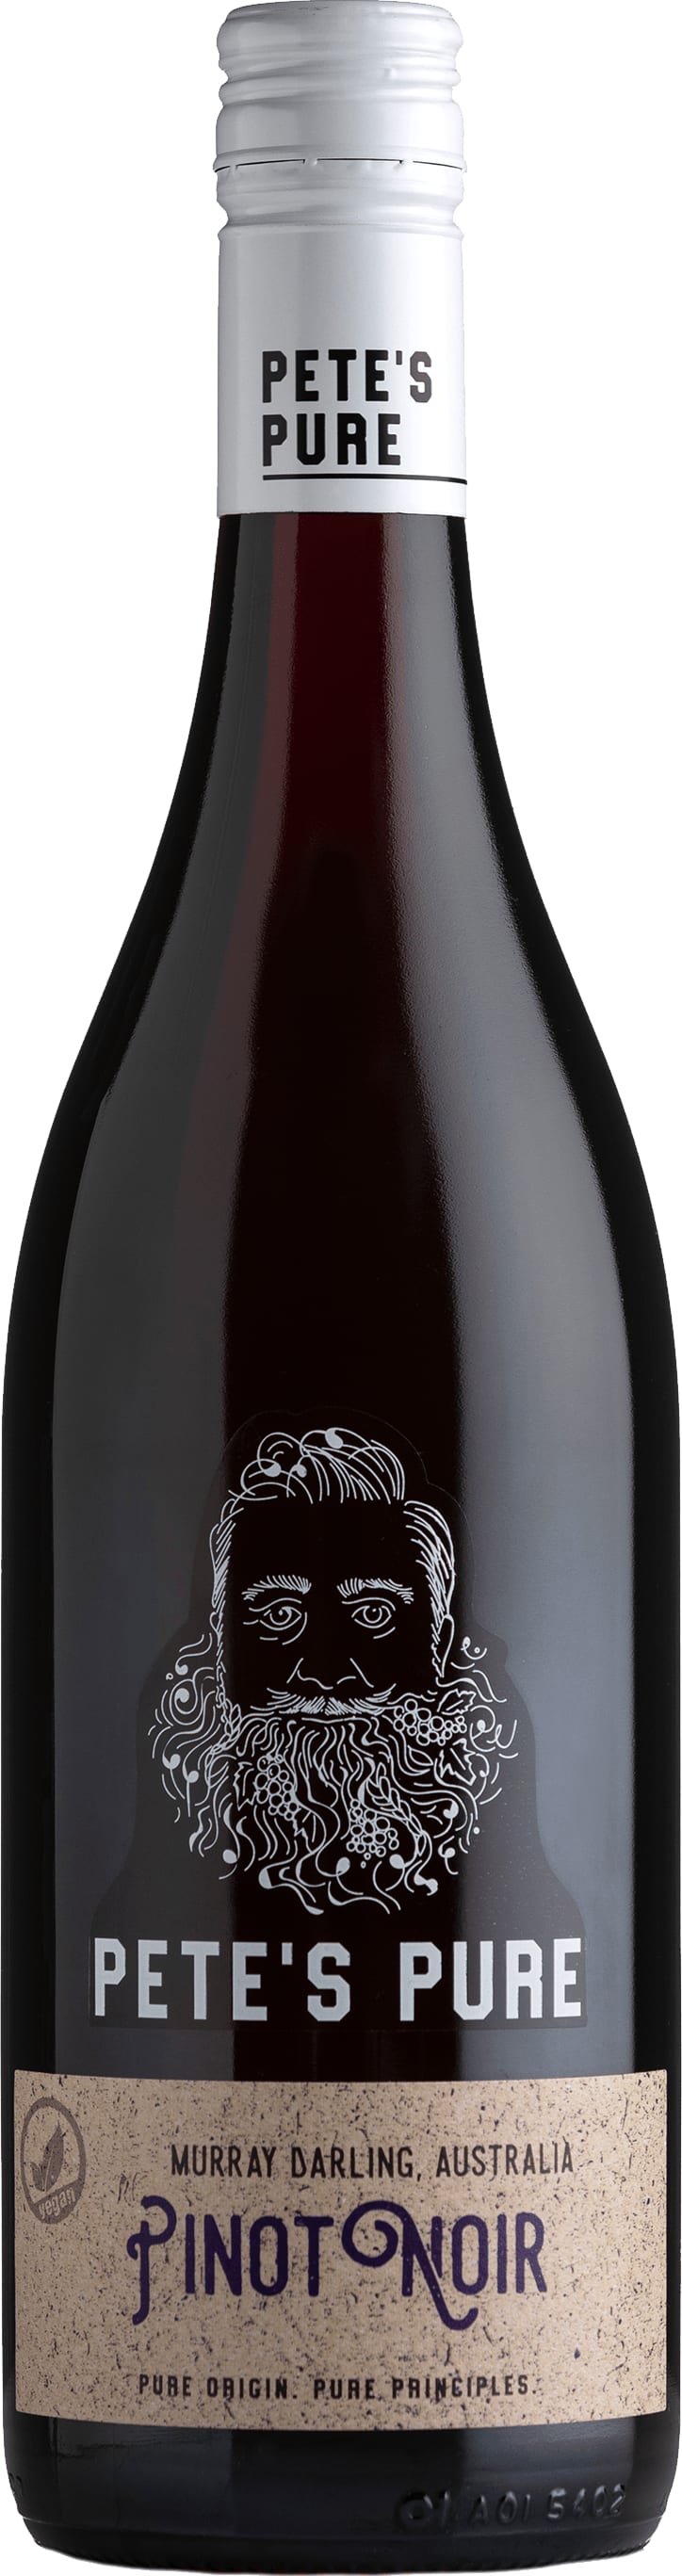 Pete's Pure Wine Pinot Noir 2022 75cl - Buy Pete's Pure Wine Wines from GREAT WINES DIRECT wine shop